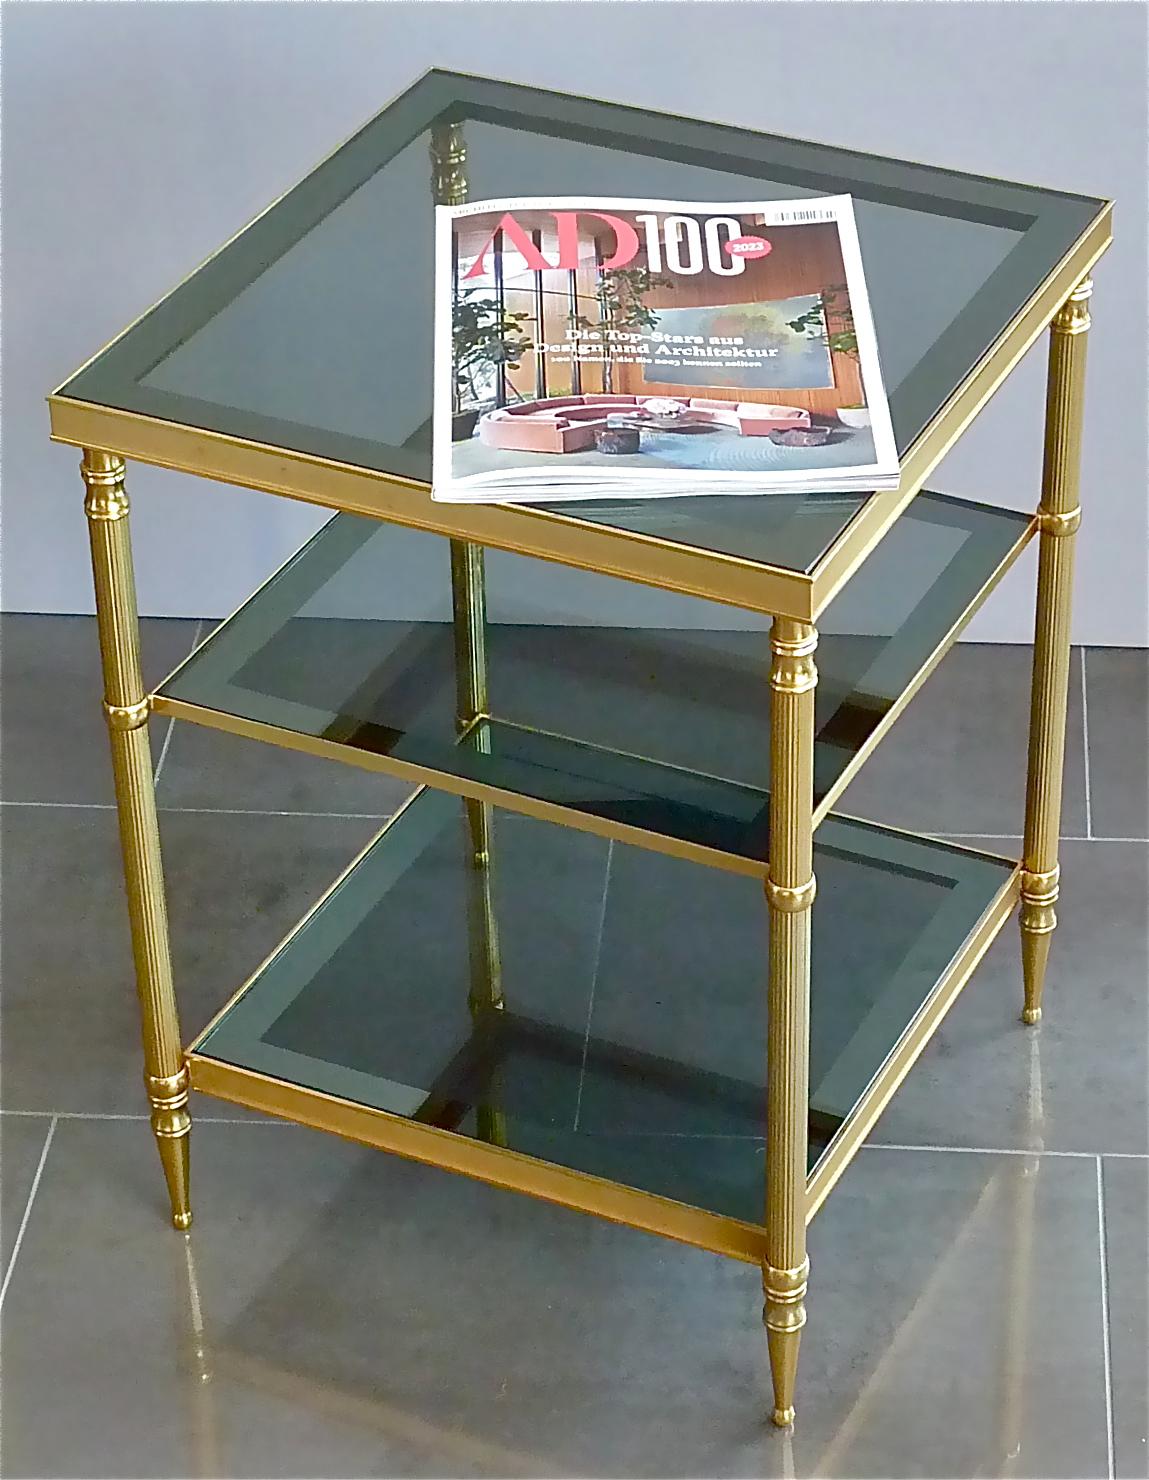 Chic and elegant French Maison Baguès gilt brass and mirrored glass side, sofa, couch or end table, Paris France circa 1950-1960. The heavy and high quality side table comparable to Maison Jansen and Maison Charles is 54 cm / 21.26 inches tall, 40